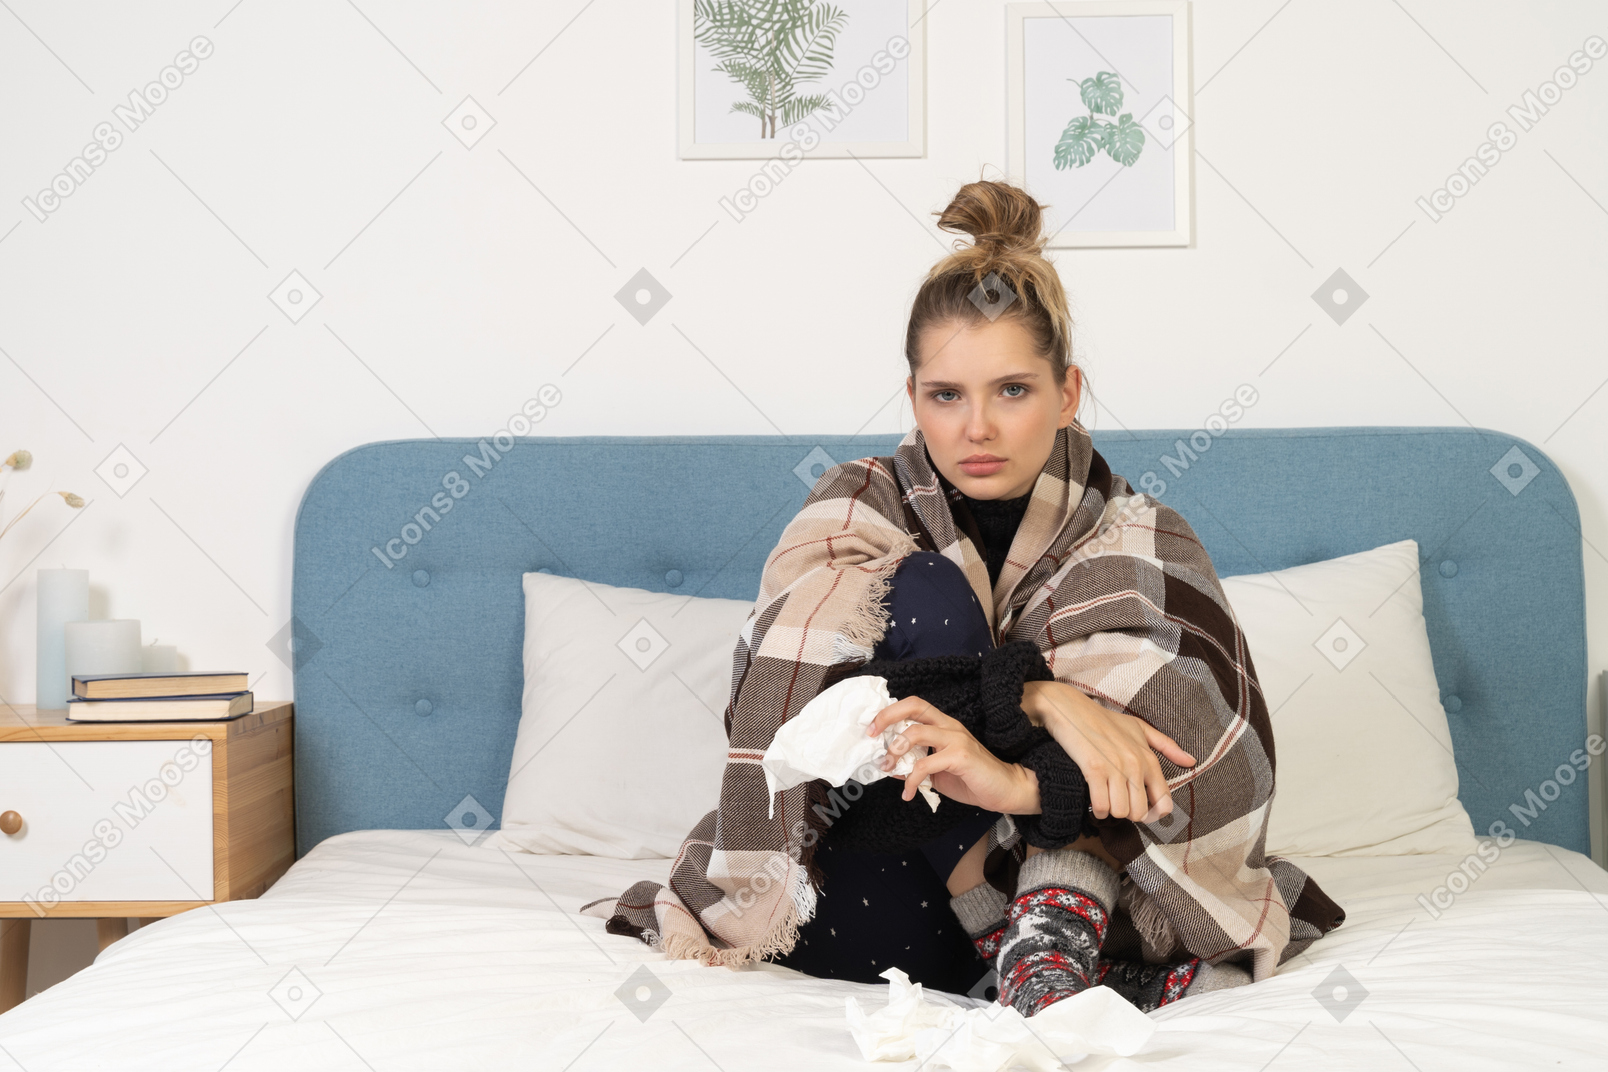 Front view of an ill young lady in pajamas wrapped in checked blanket